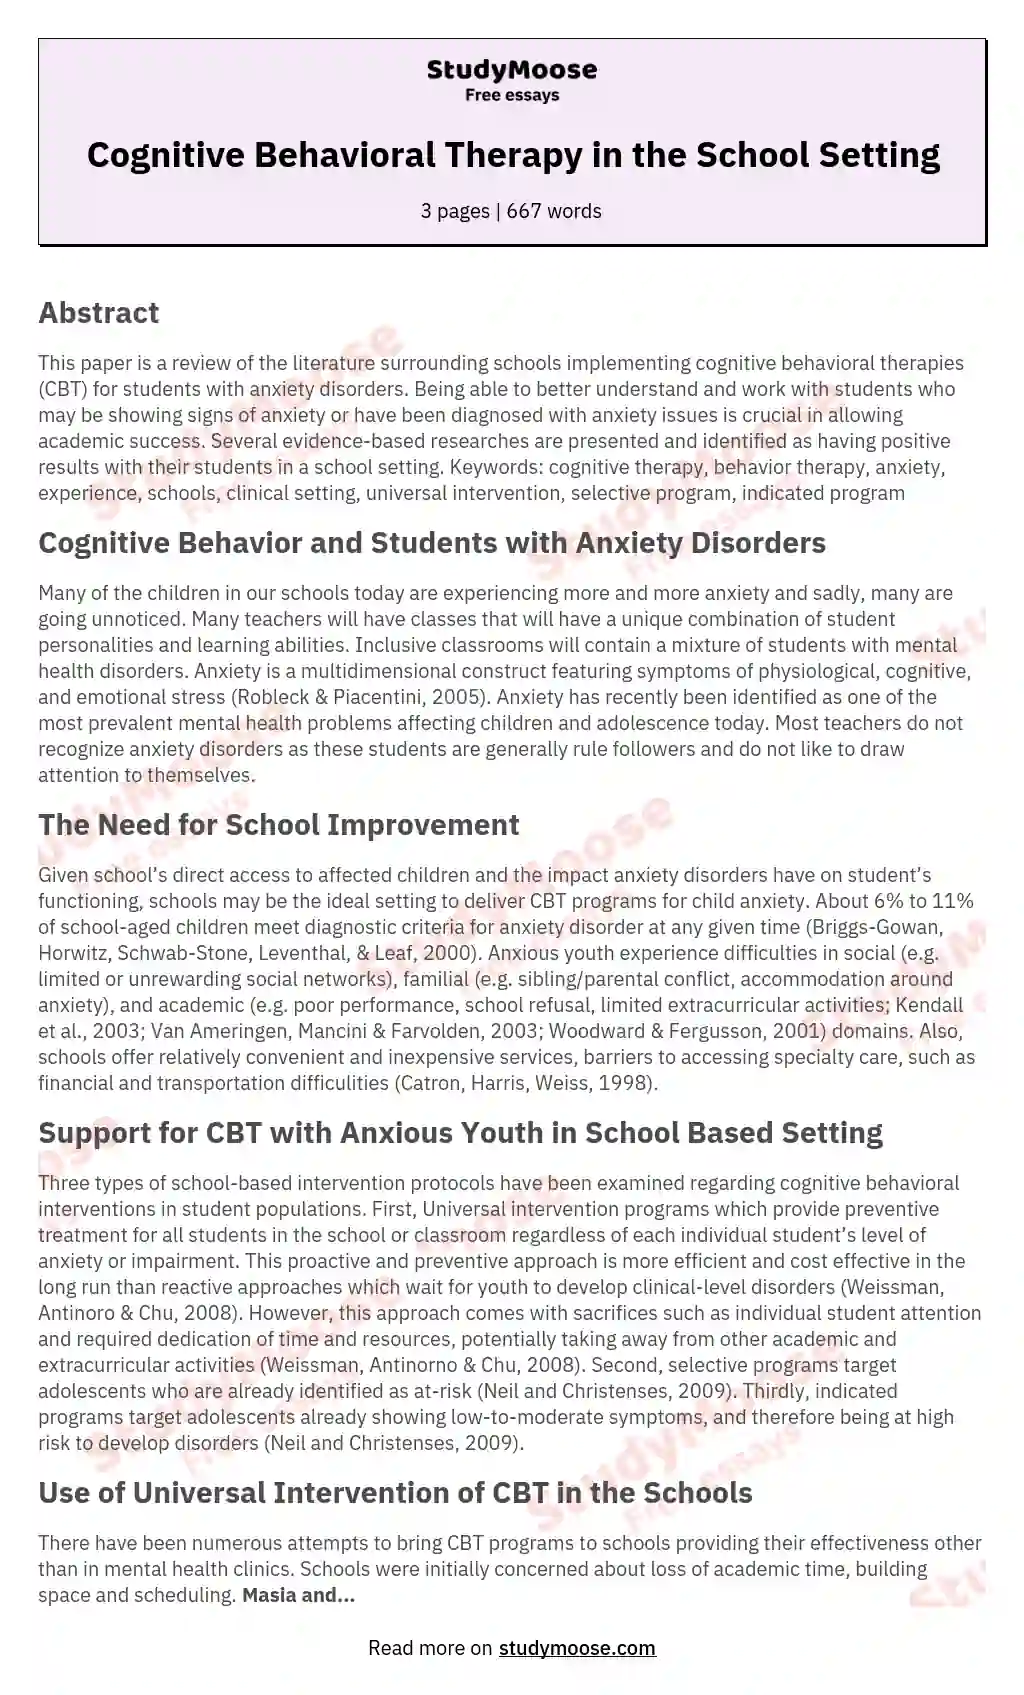 Cognitive Behavioral Therapy in the School Setting essay